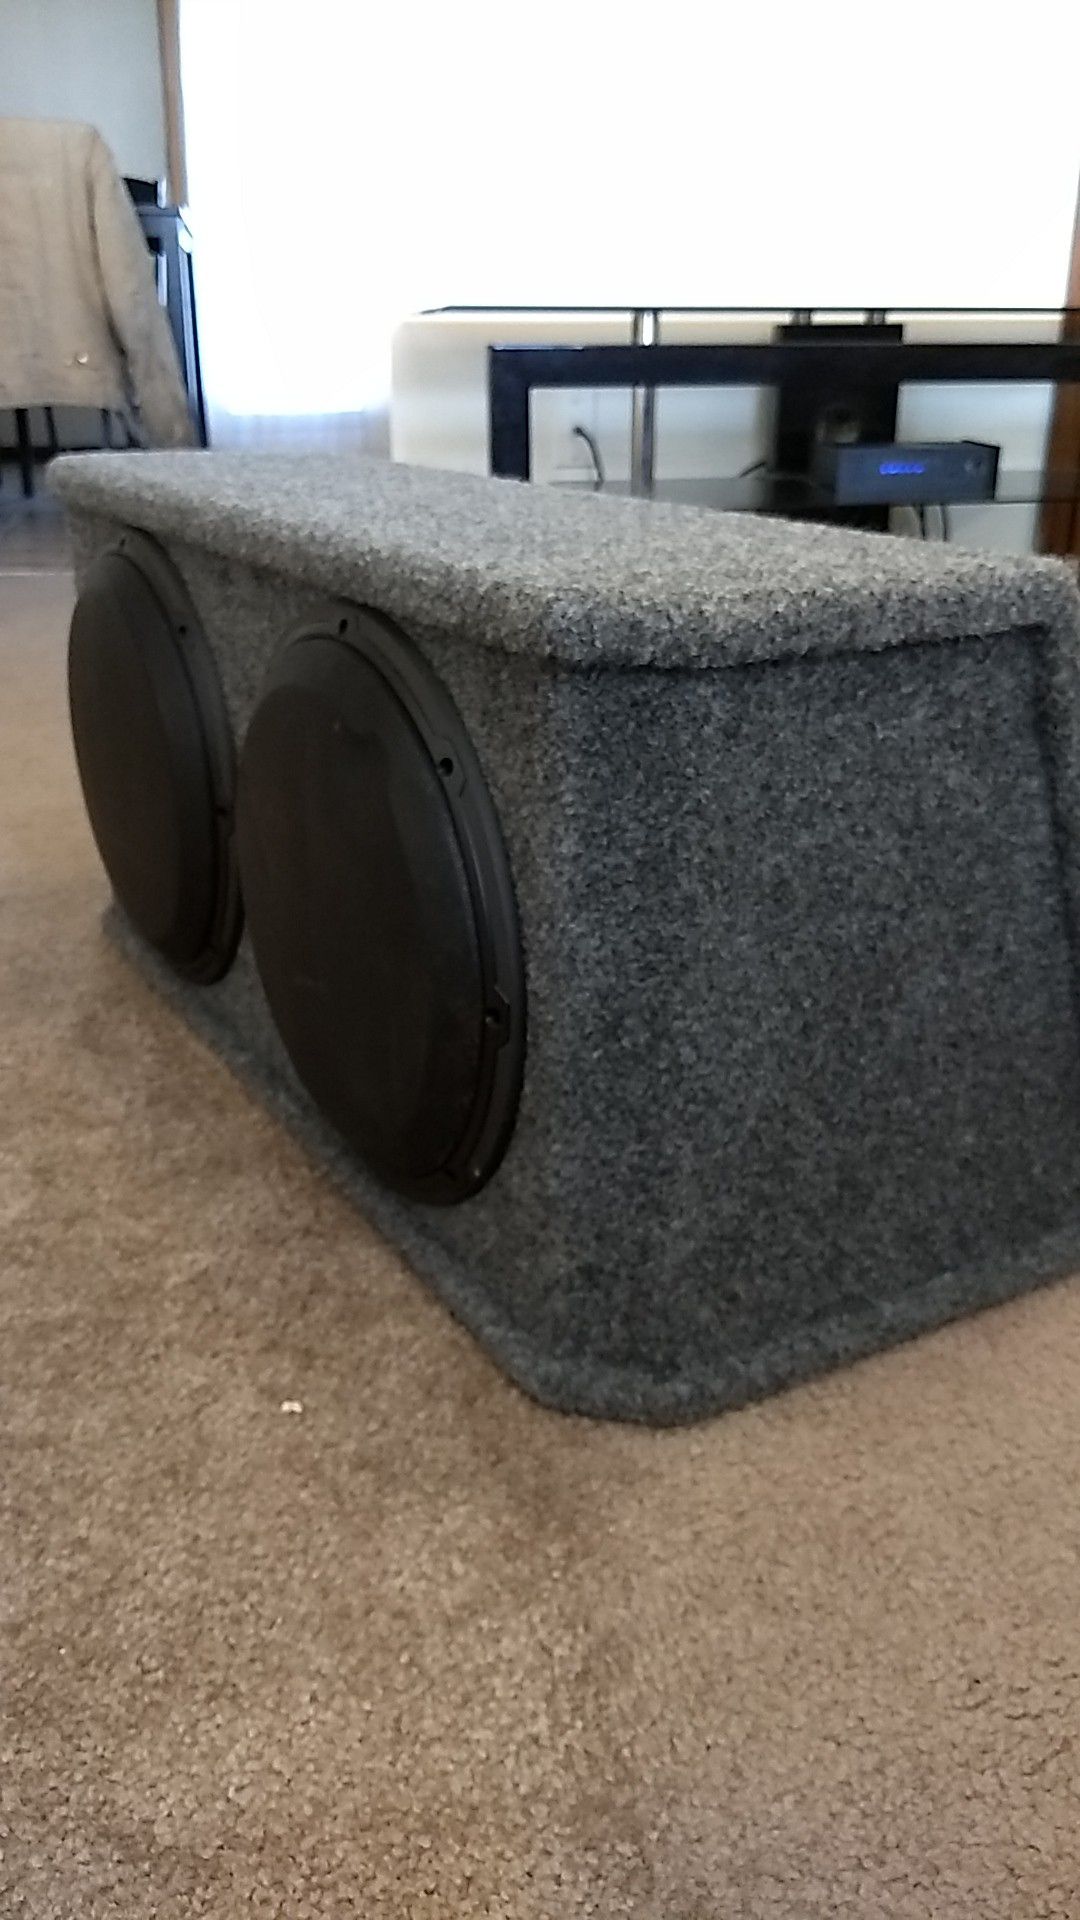 JL Subwoofers and Amp